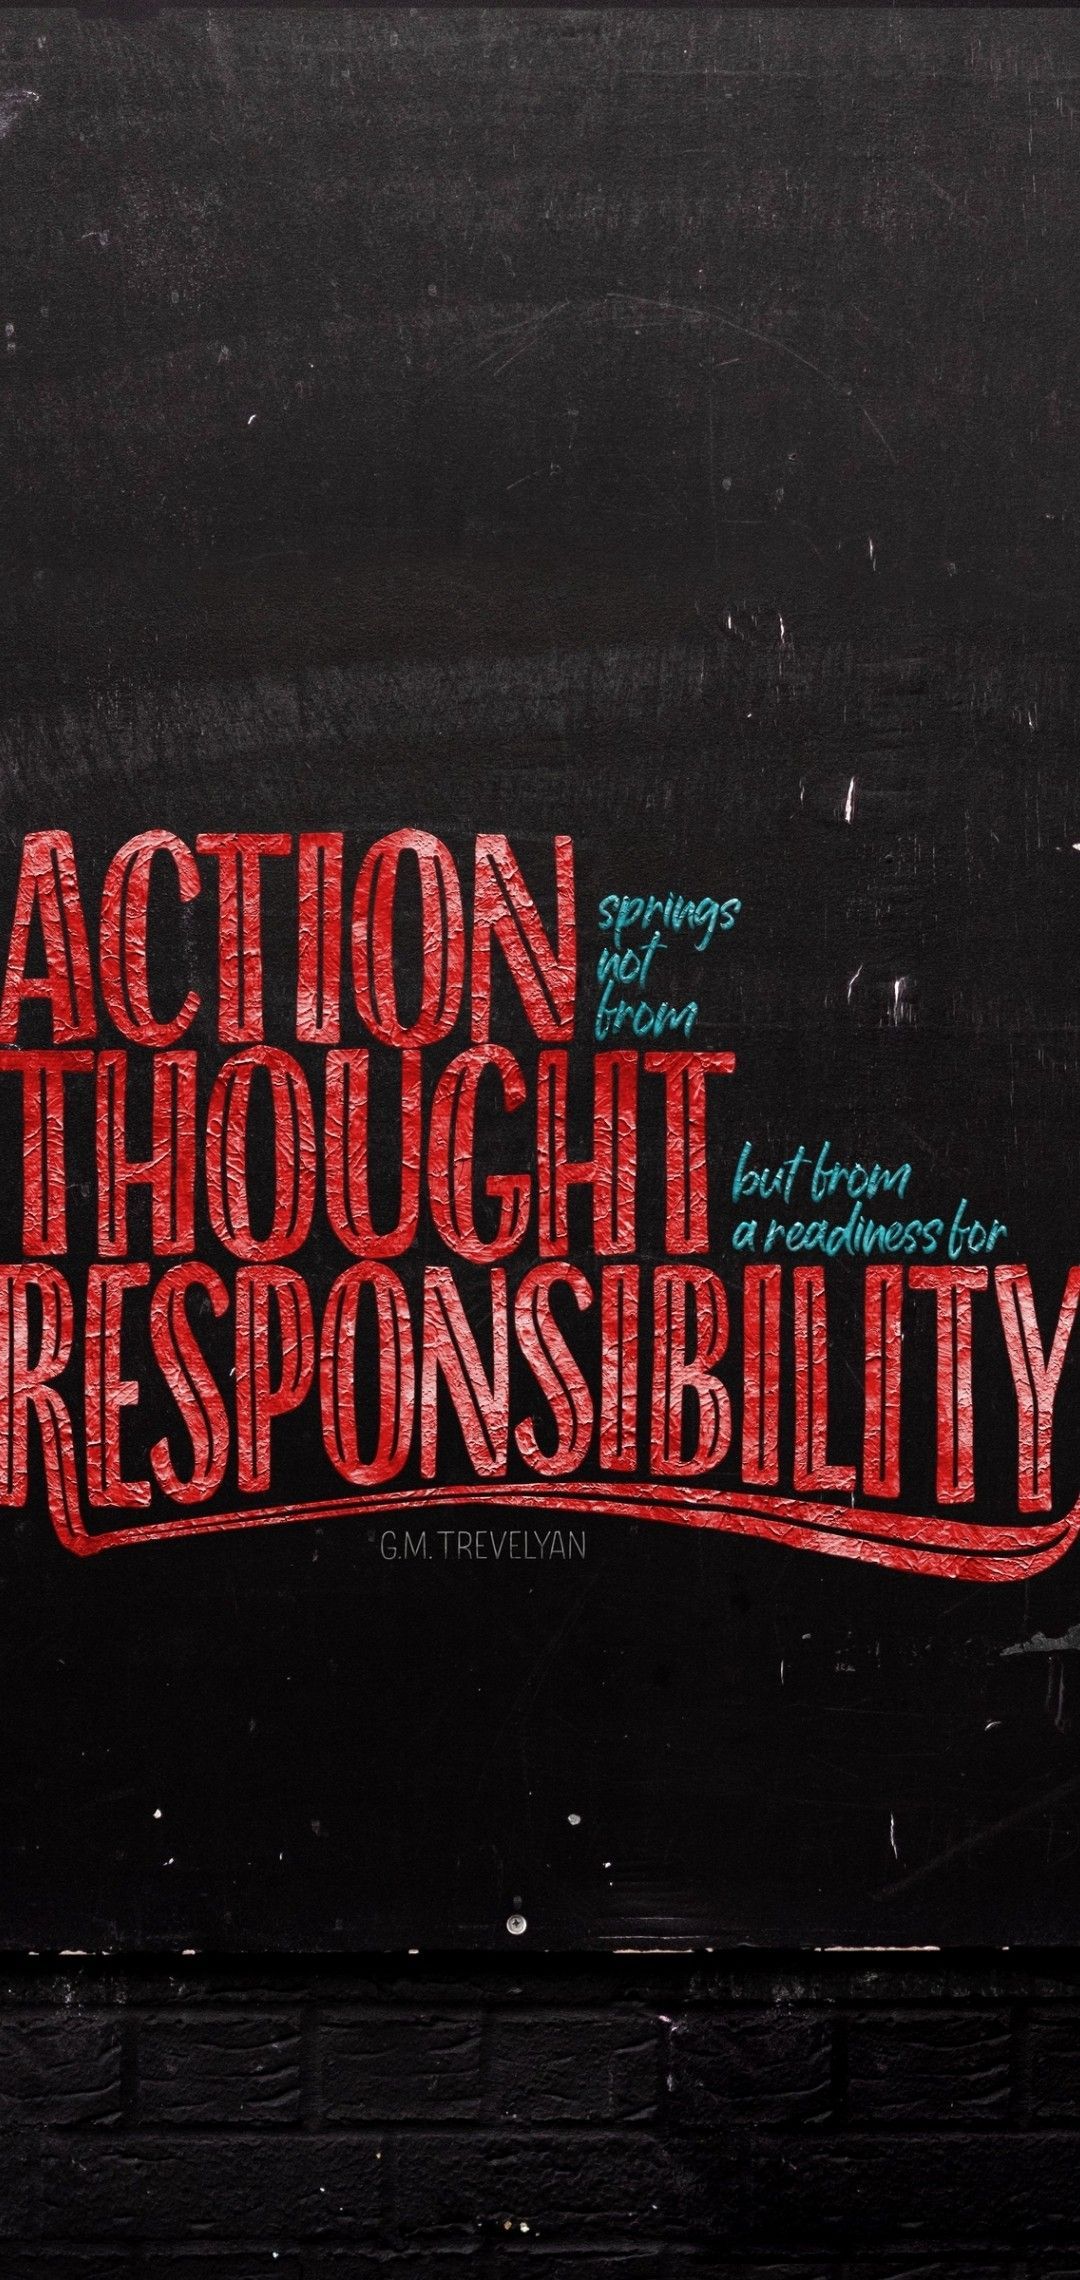 Action thought responsibility. Background HD wallpaper, Wallpaper, Wallpaper downloads